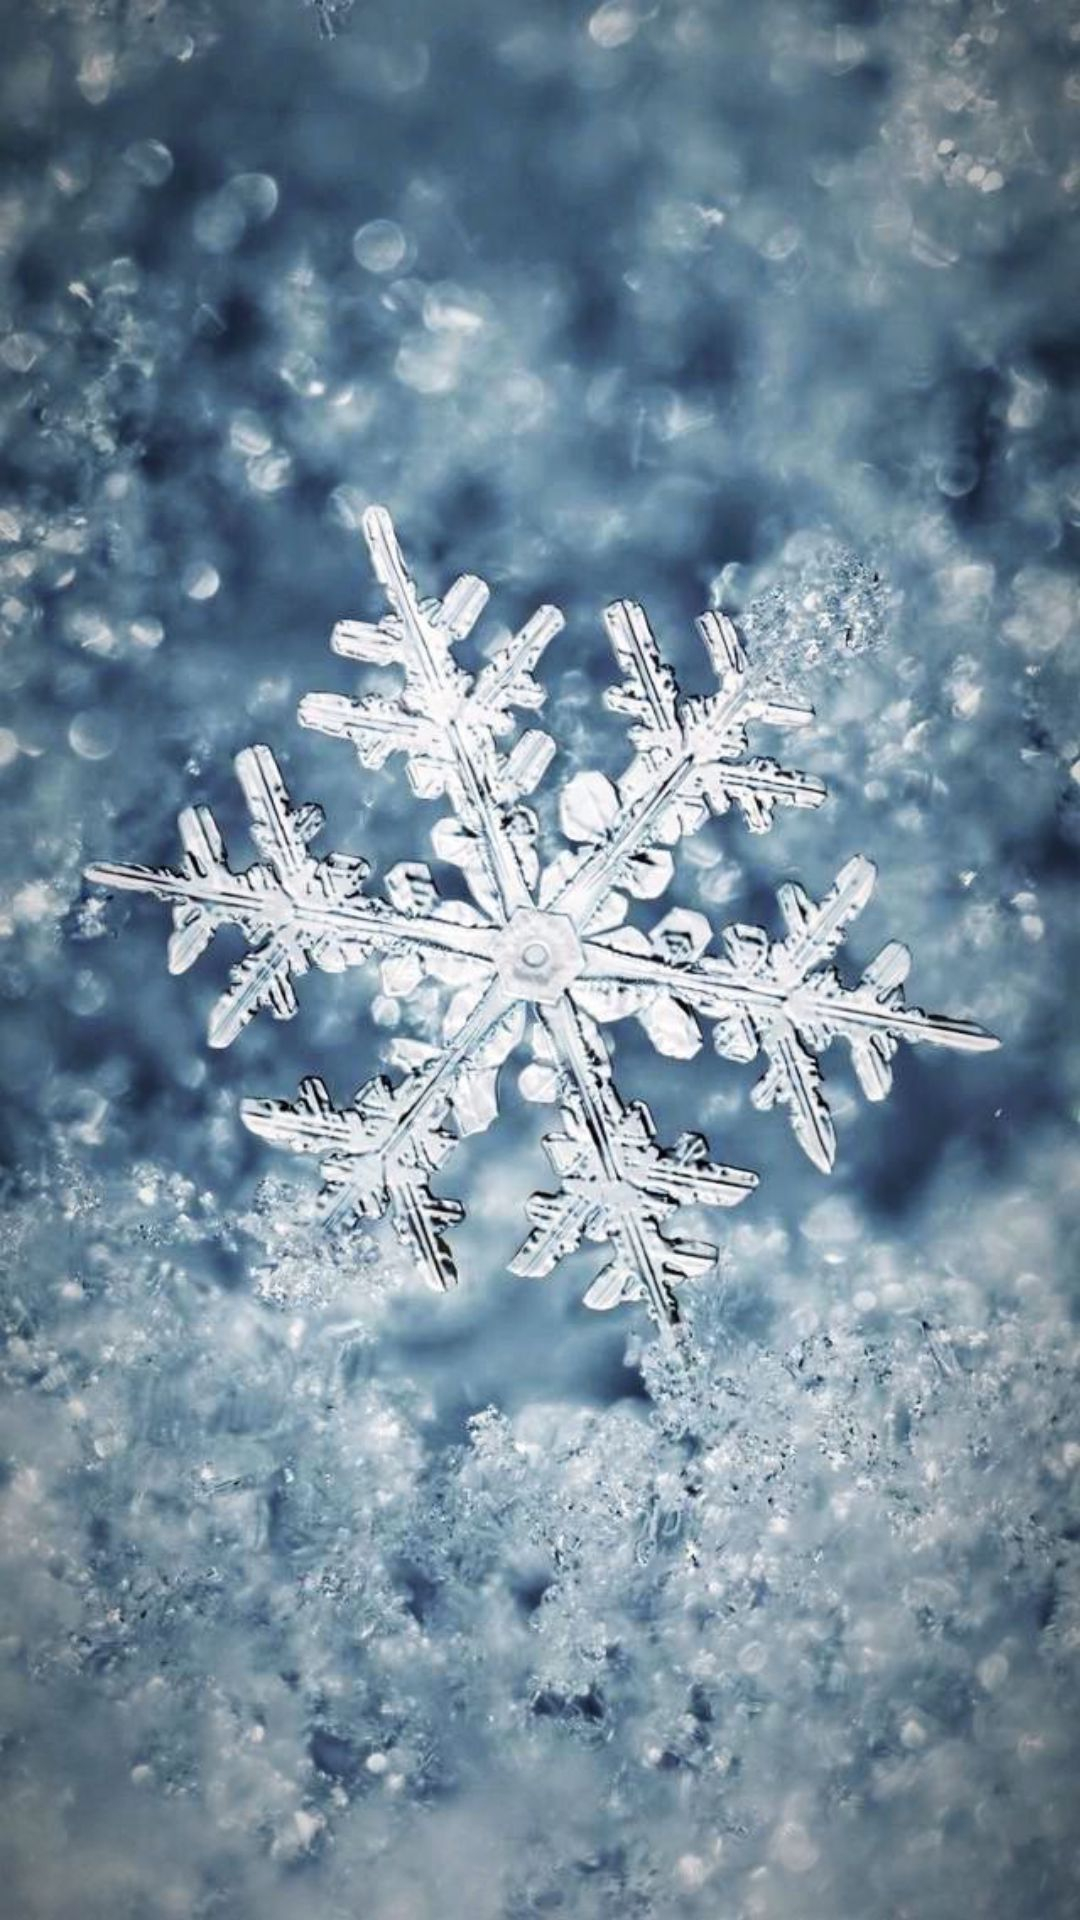 1080x1920 Snowflake Wallpapers Top 25 Best Snowflake Backgrounds Download